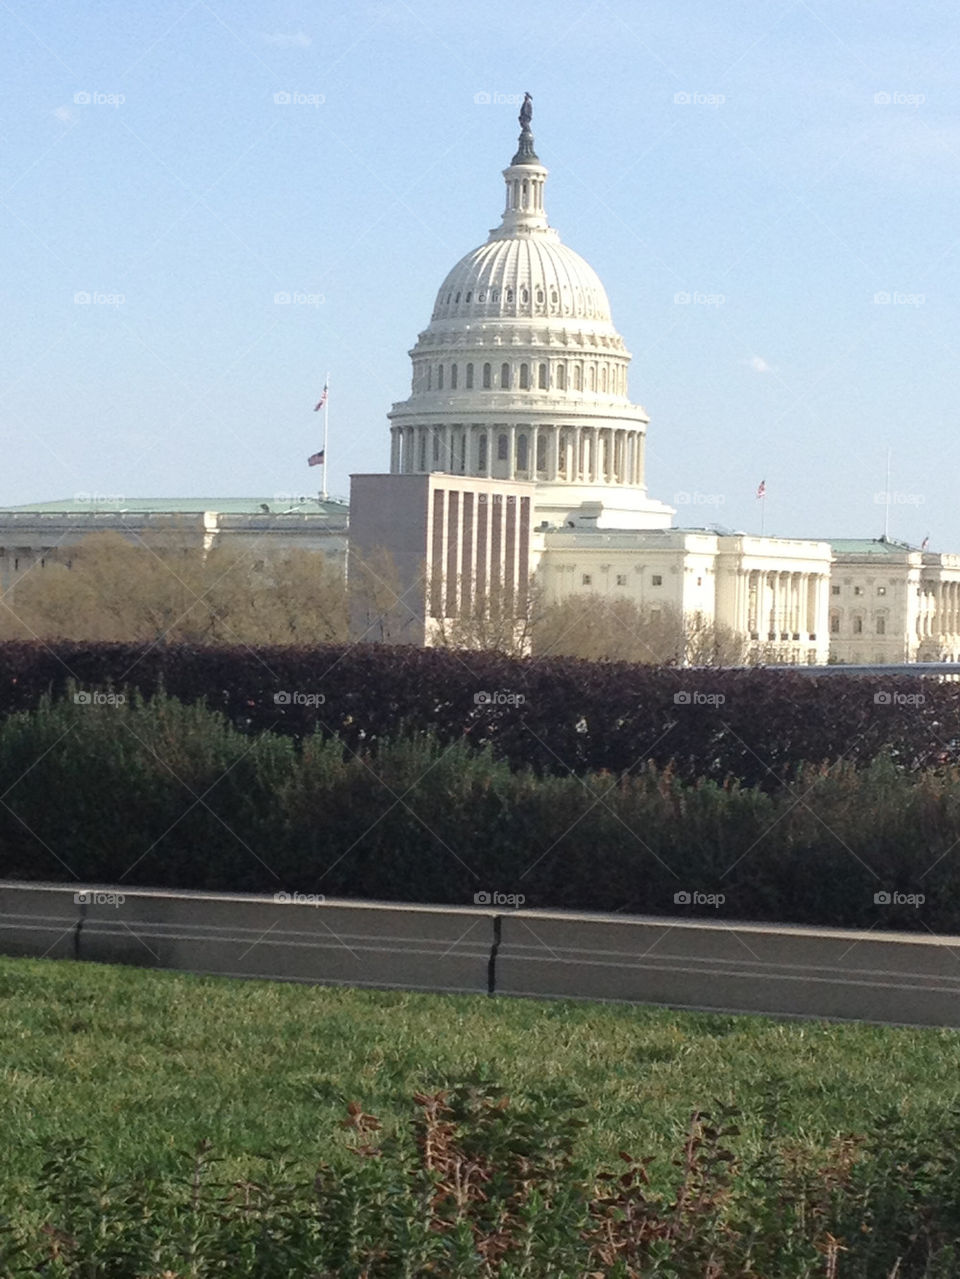 The Capitol Building in DC